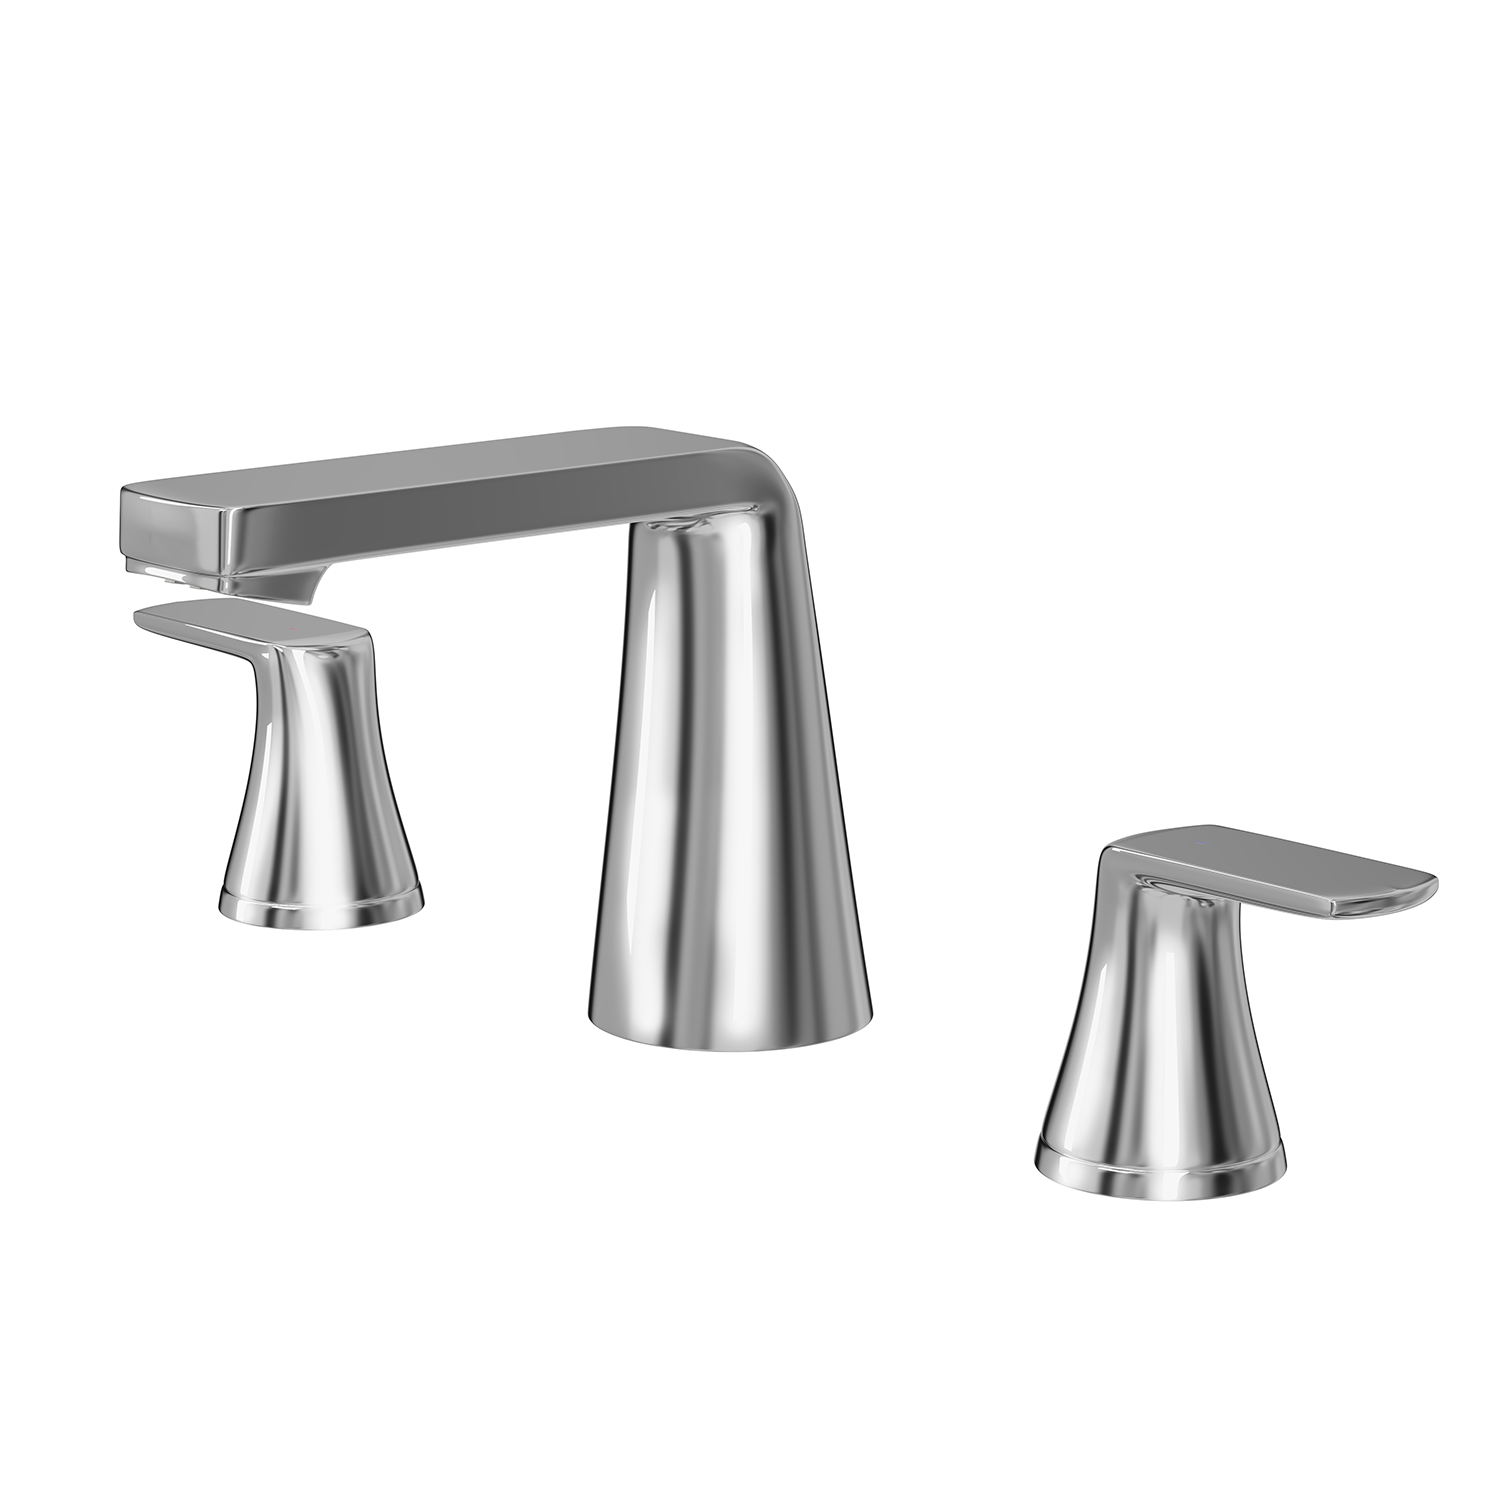 DAX Two Handle Bathroom Faucet, Brass Body, Chrome Finish, Spout Height 4 Inches (DAX-8236C-CR)